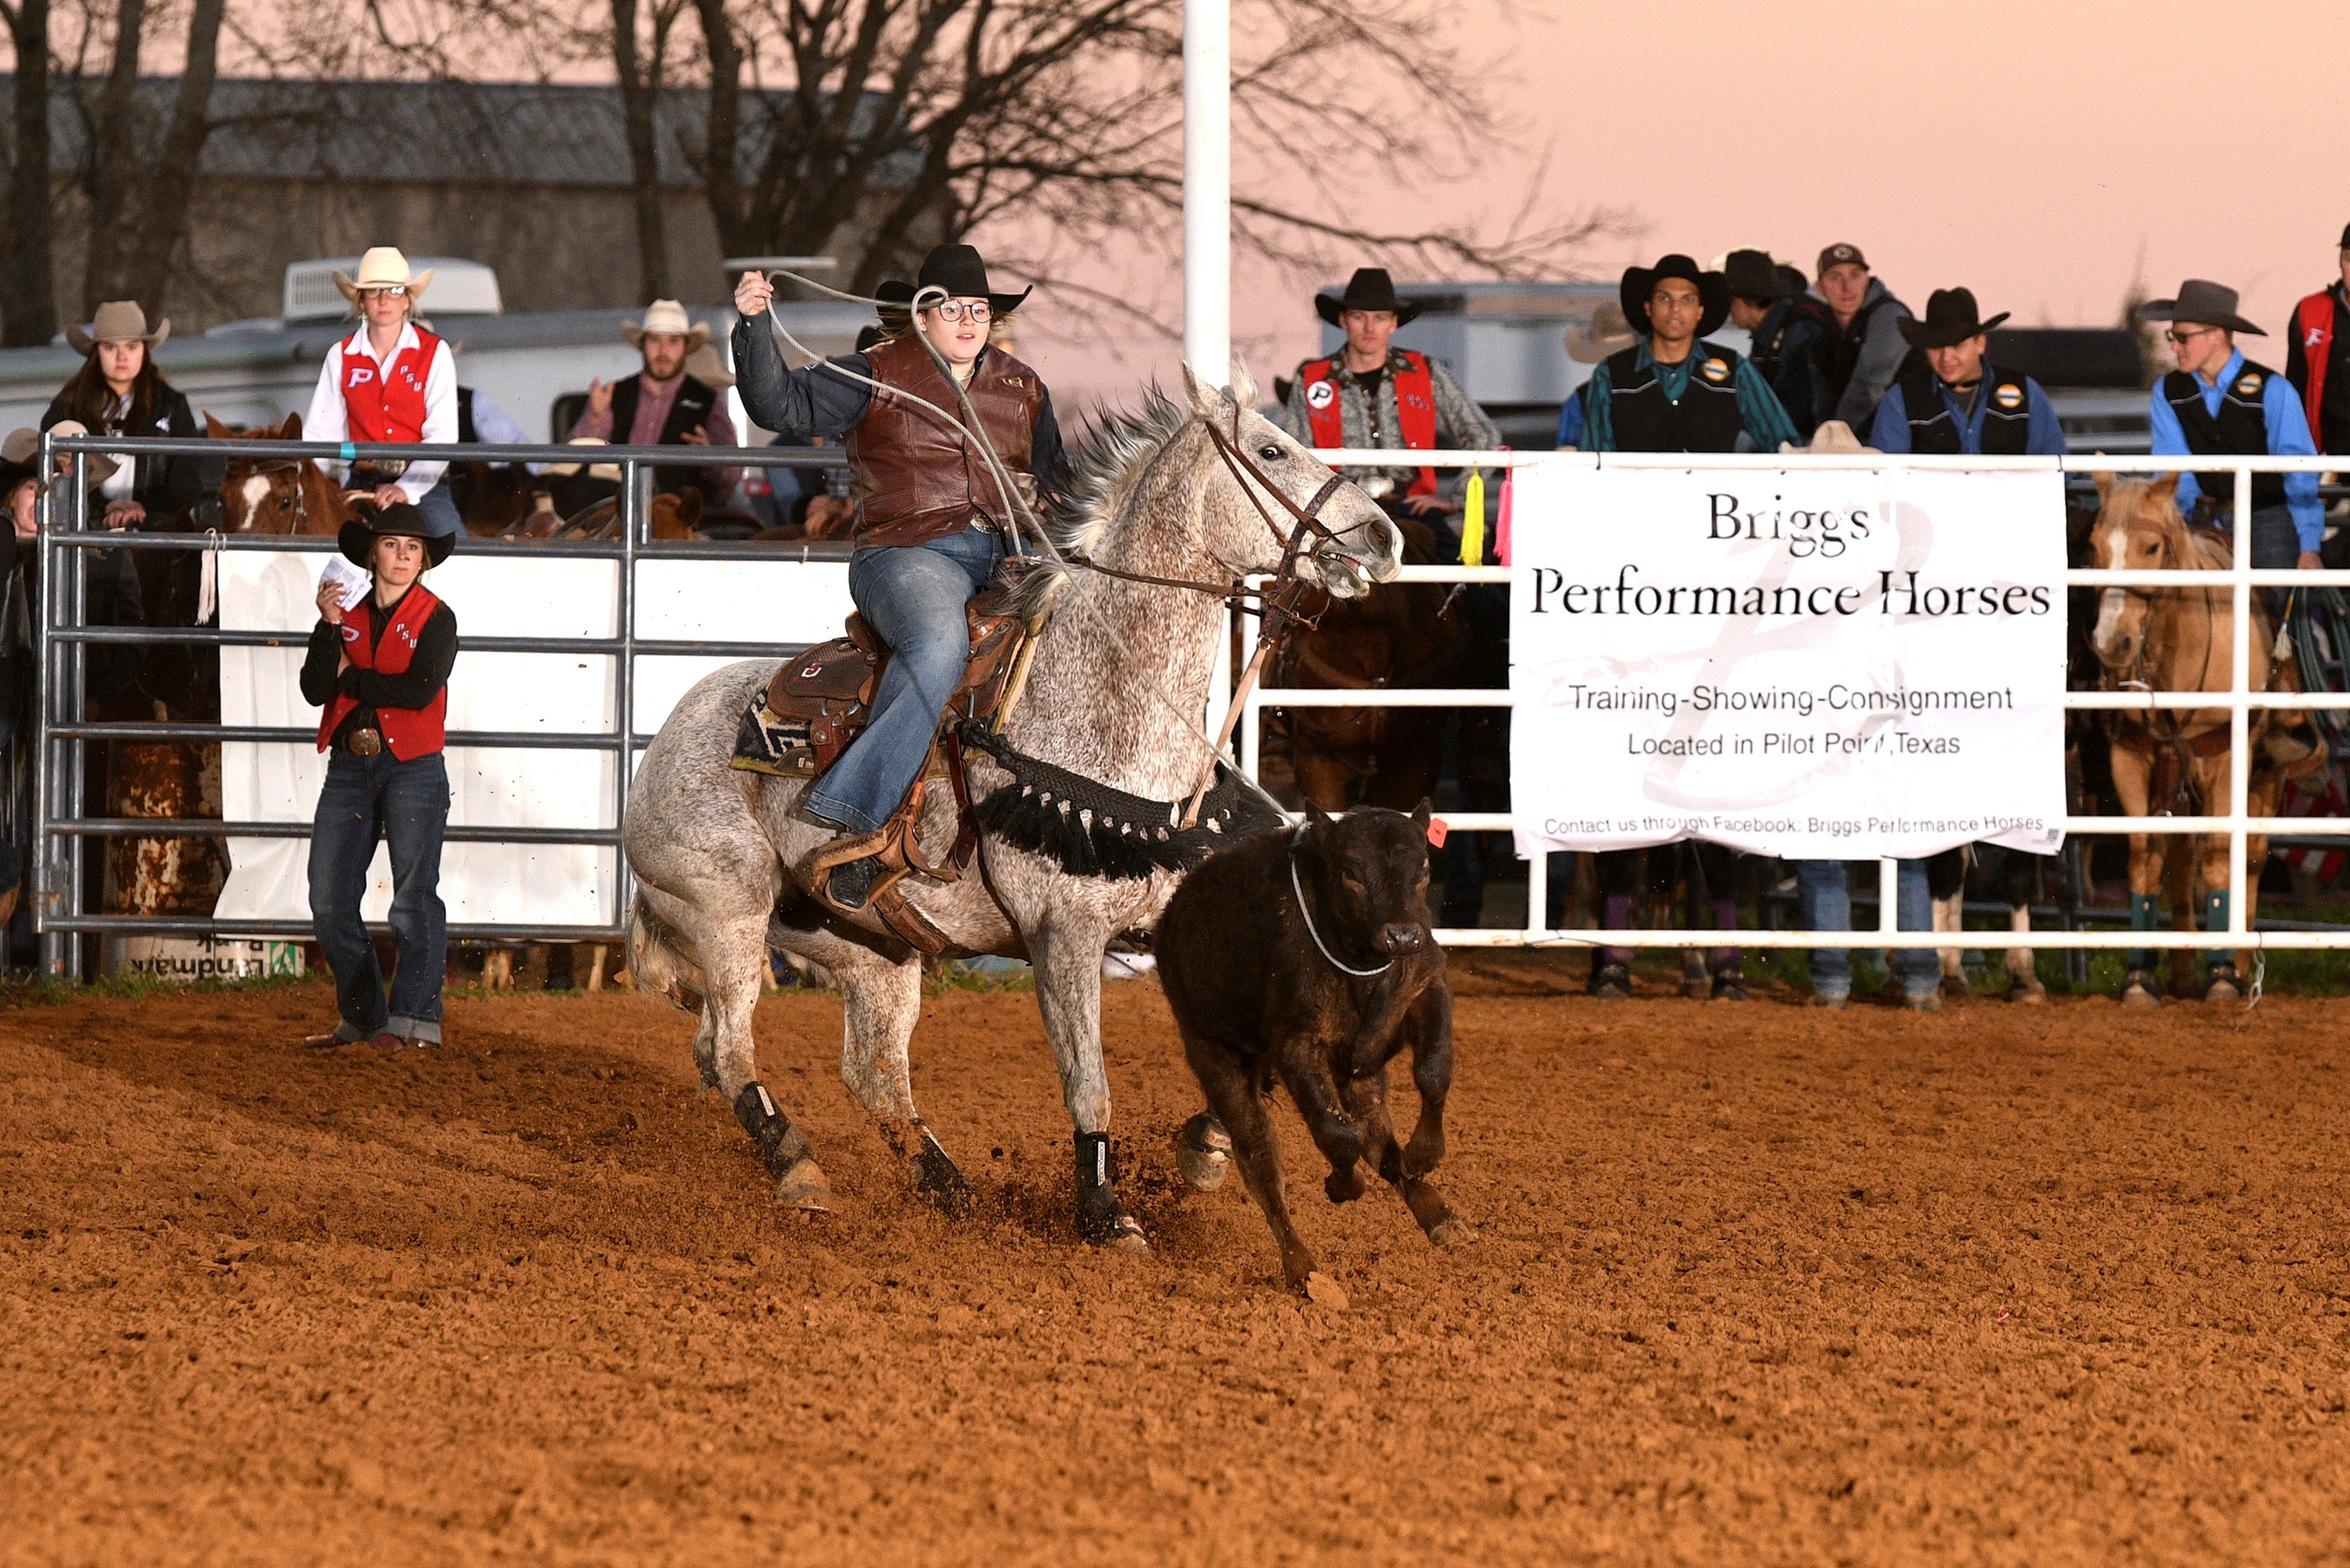 Broncbuster women with a strong showing at Southeastern Oklahoma State Rodeo